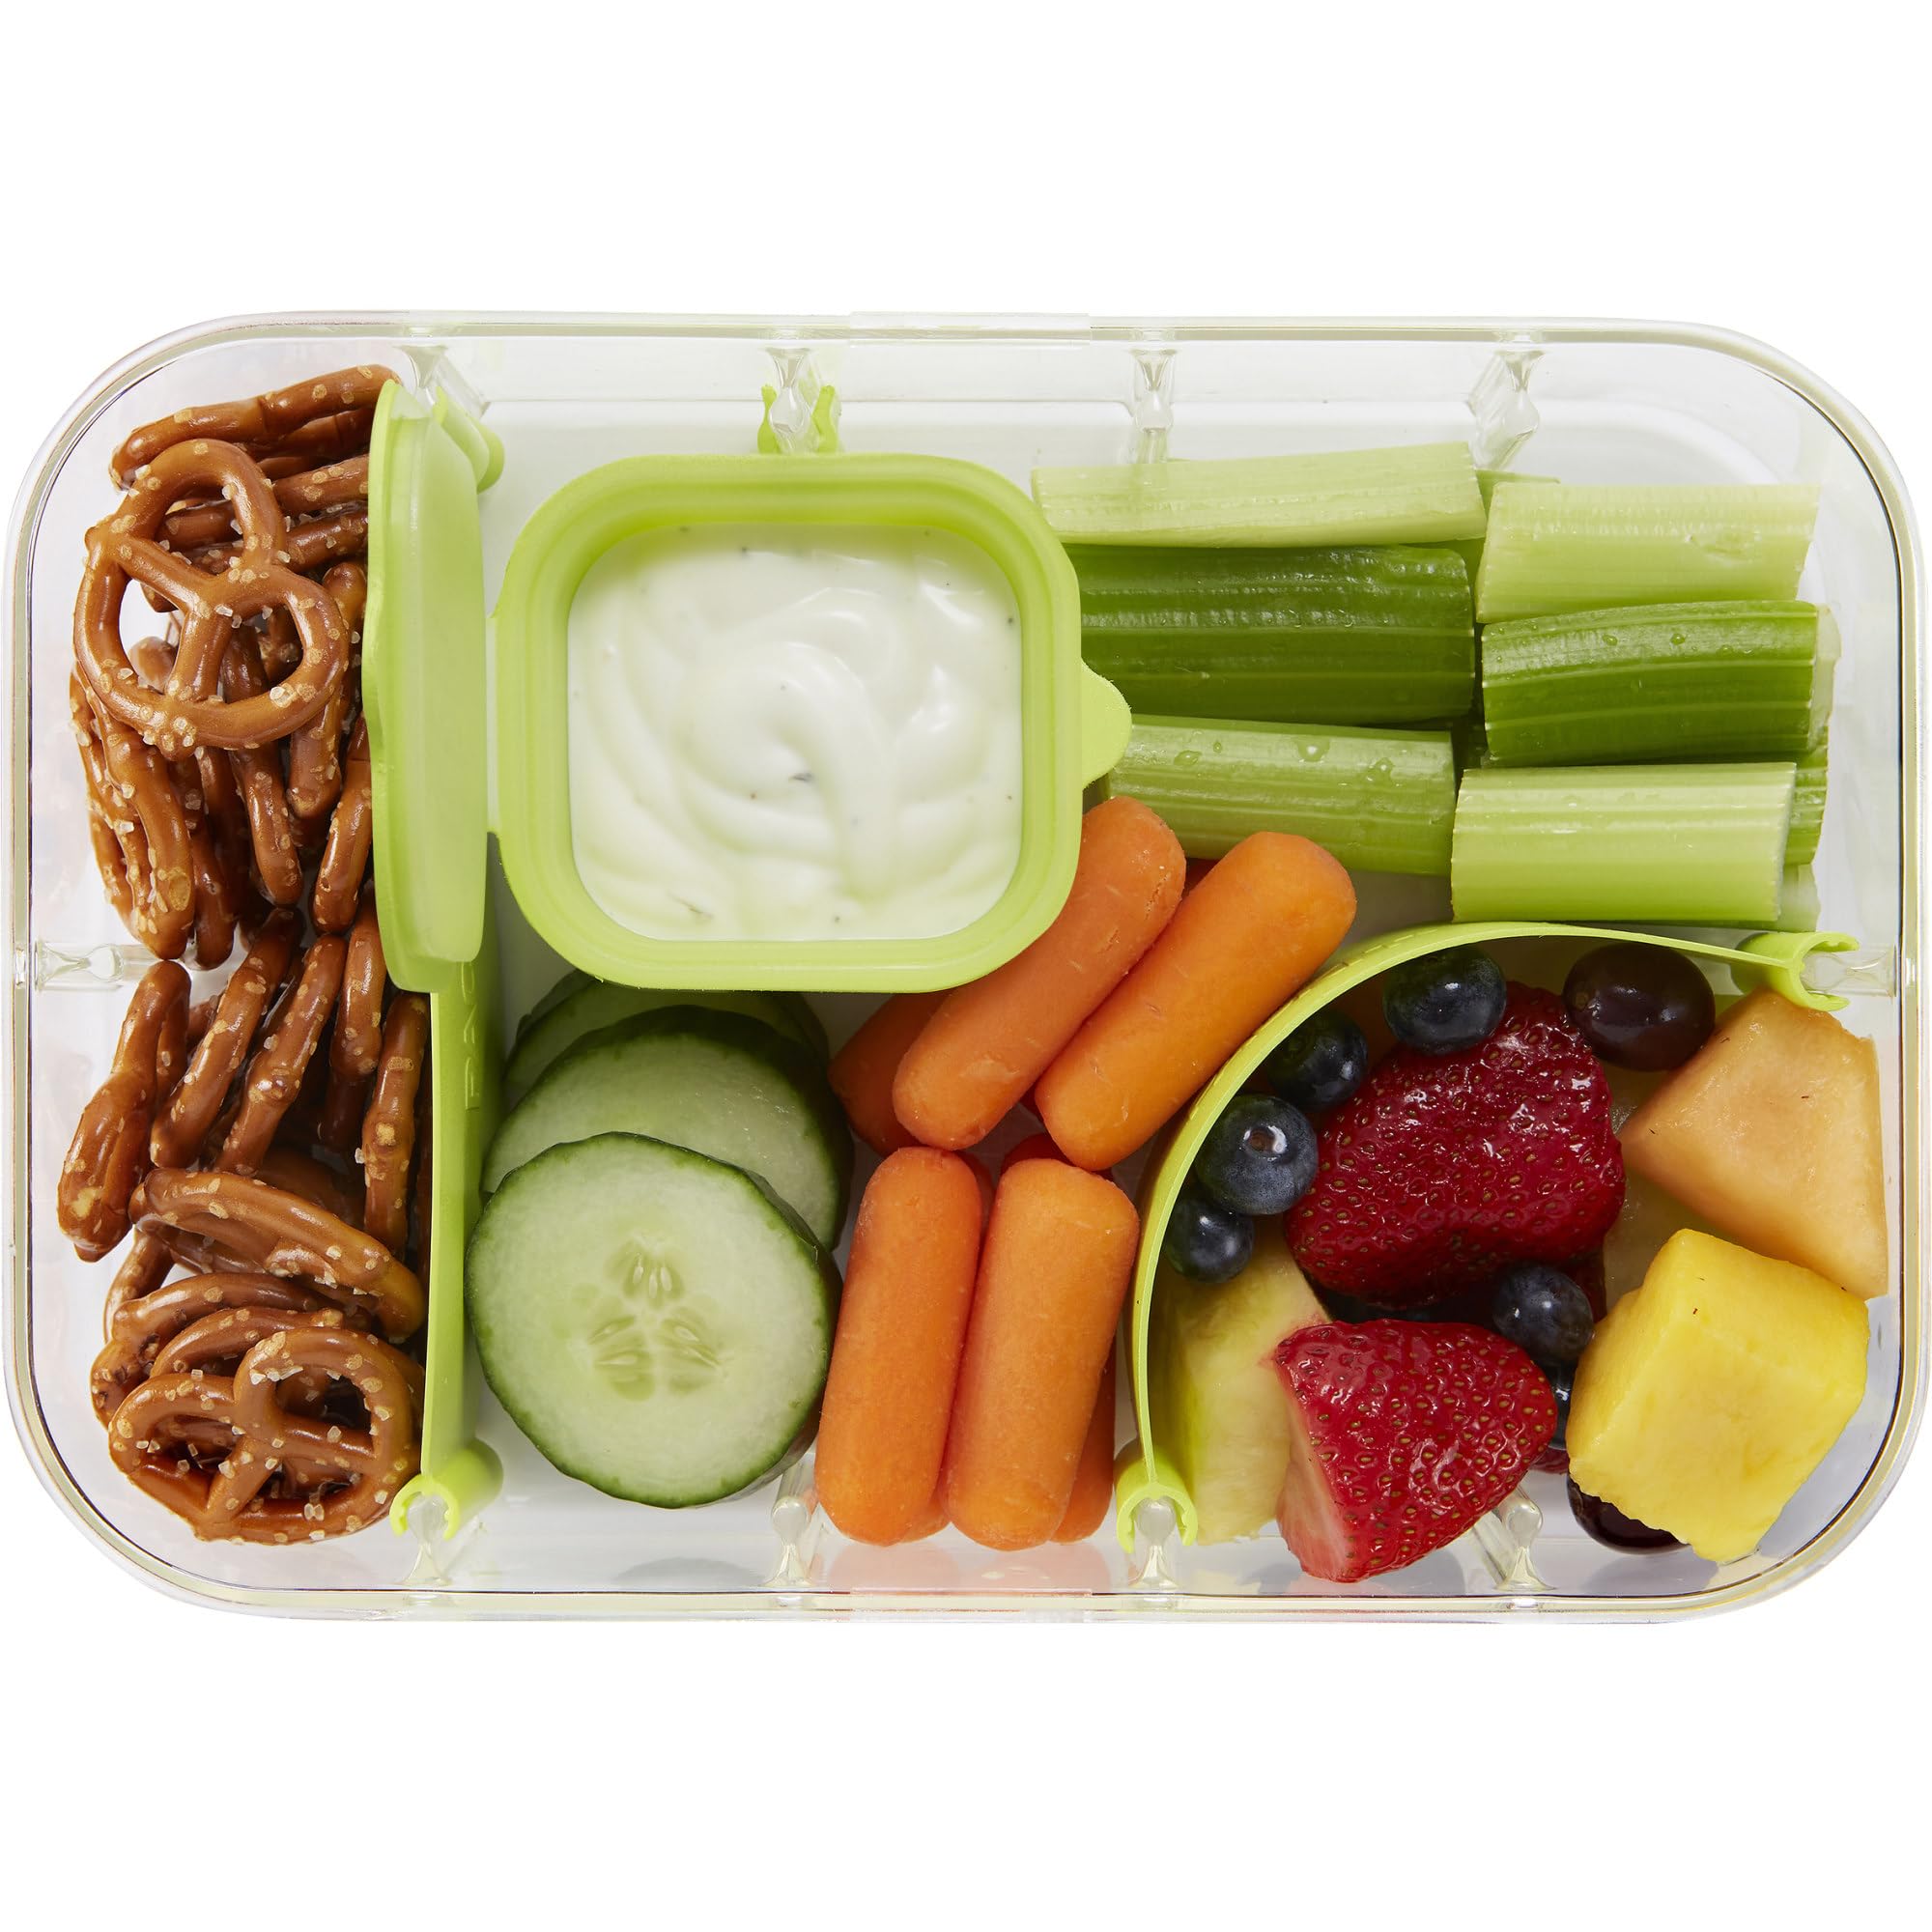 PackIt Flex Bento Food Storage Container, Lime Punch, Shatterproof Crystal Clear Base, with Leak-resistant Lid, Flexible Dividers, Microwavable, Dishwasher Safe, Perfect for Customizing Lunch